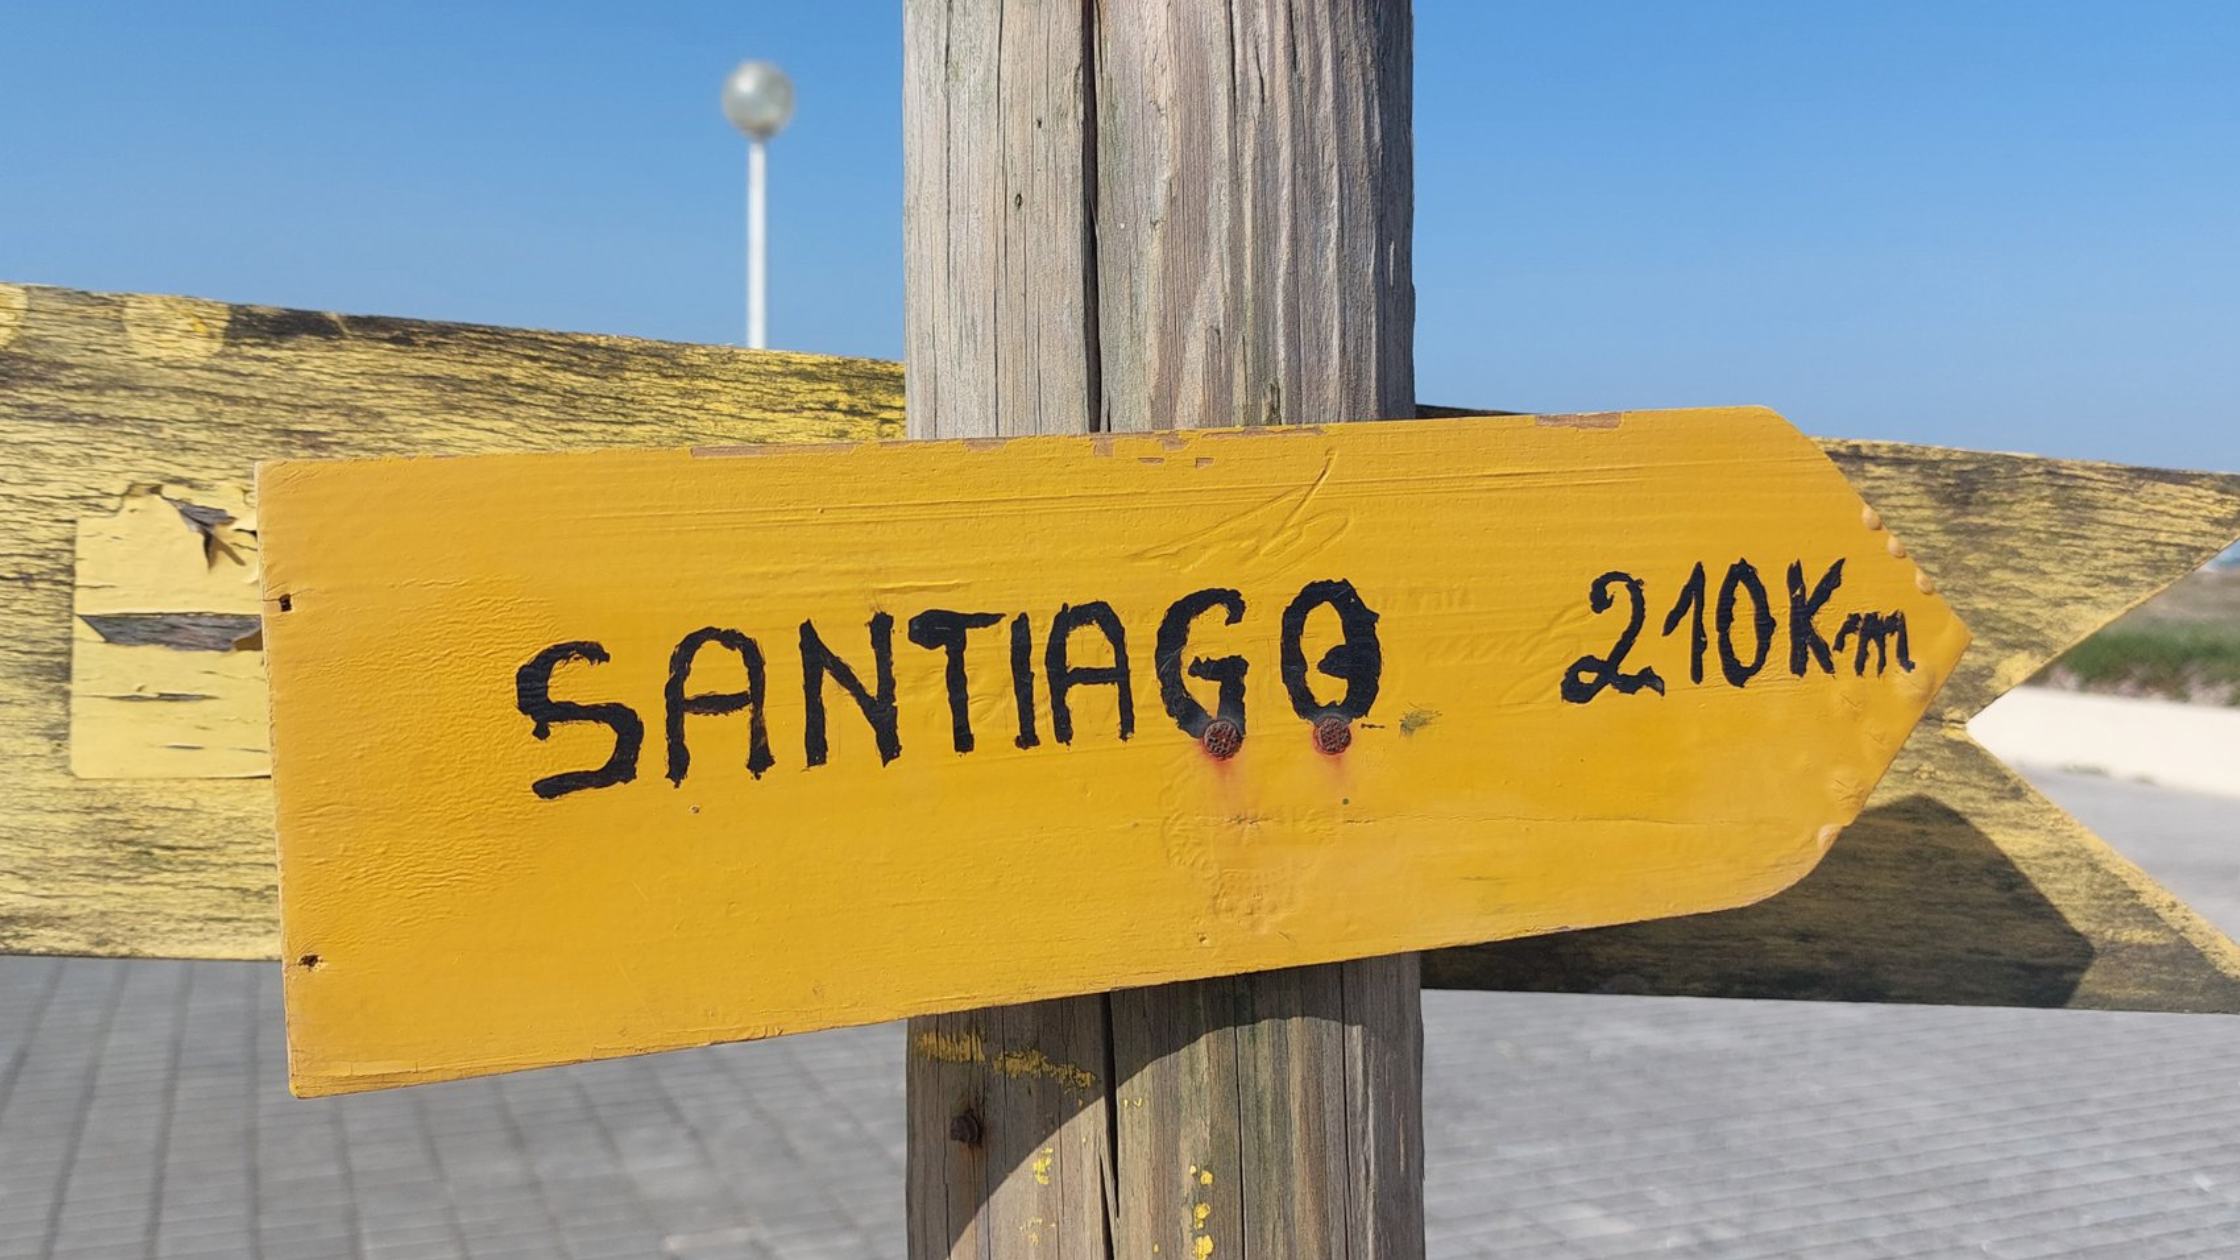 Wooden sign pointing to the right with the text "Santiago 210km".